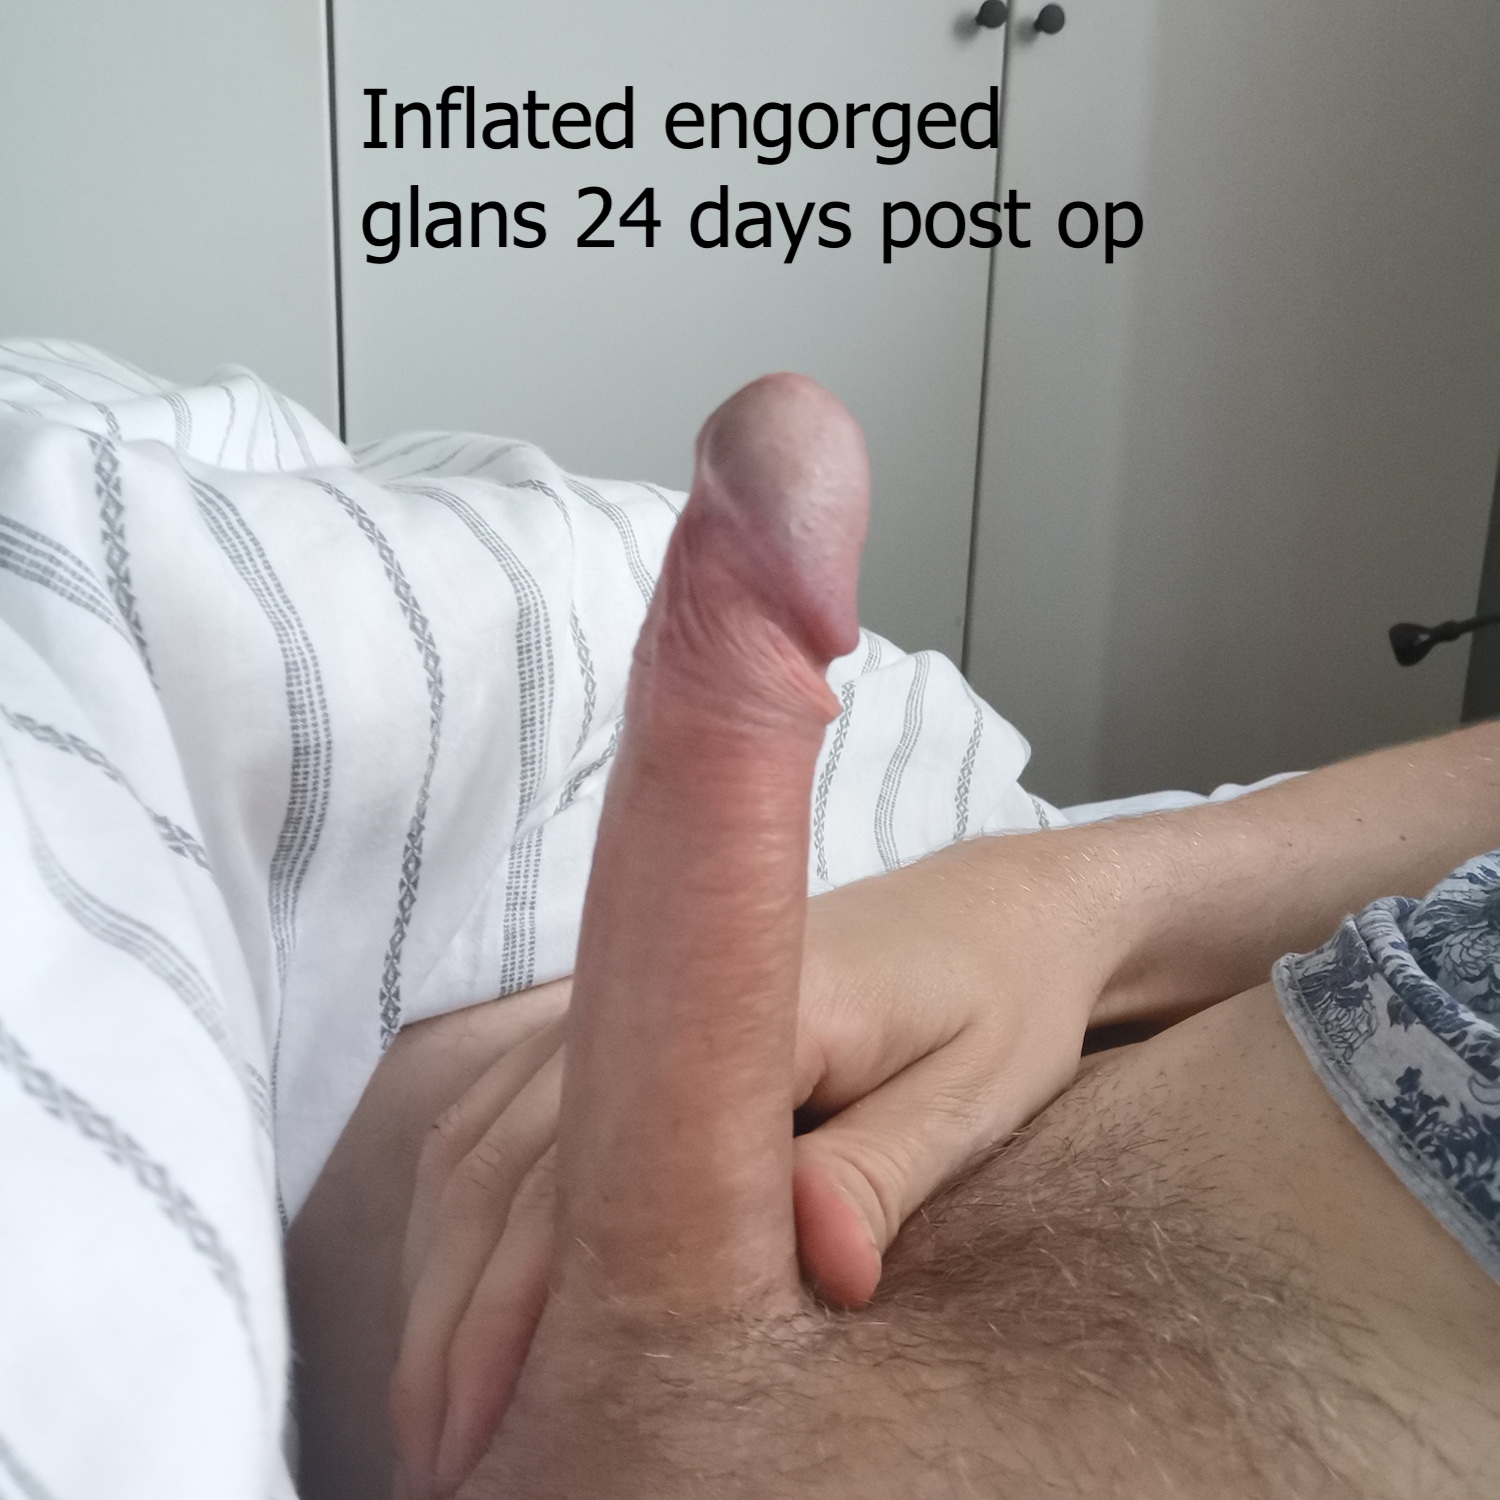 Inflated side engorged glans 24 days post op.jpg